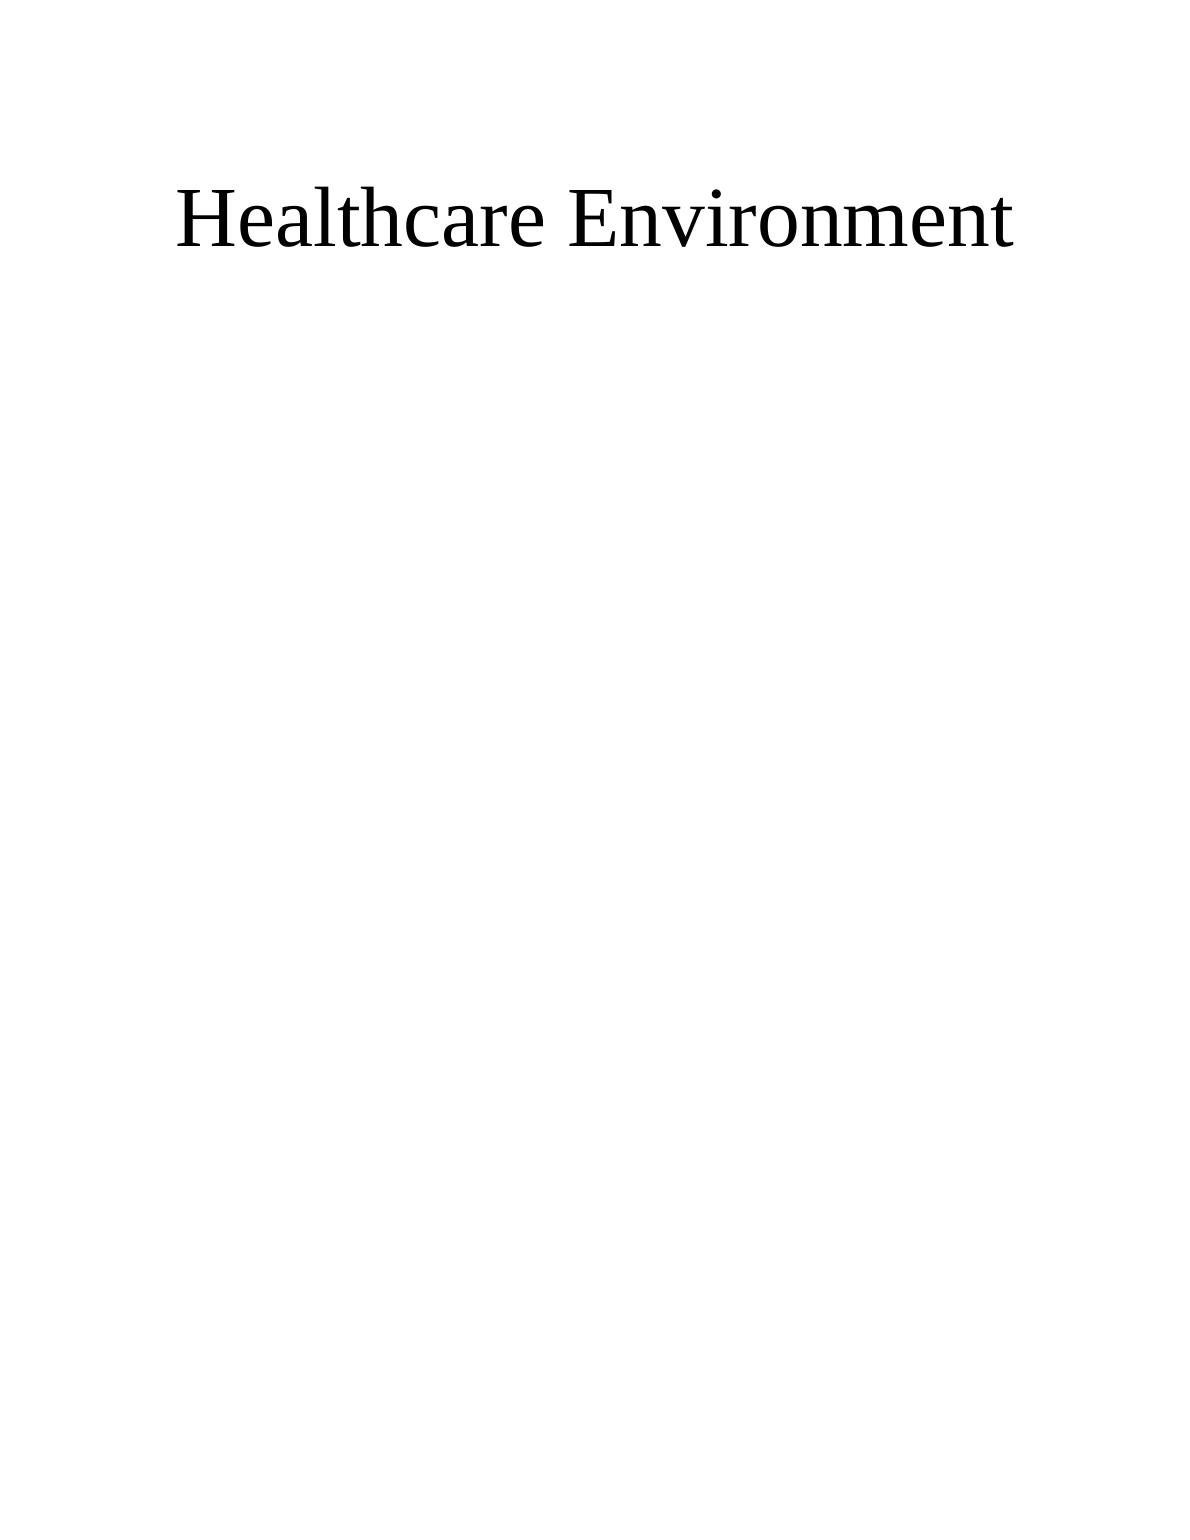 Healthcare Environment of Silver Line : Report_1